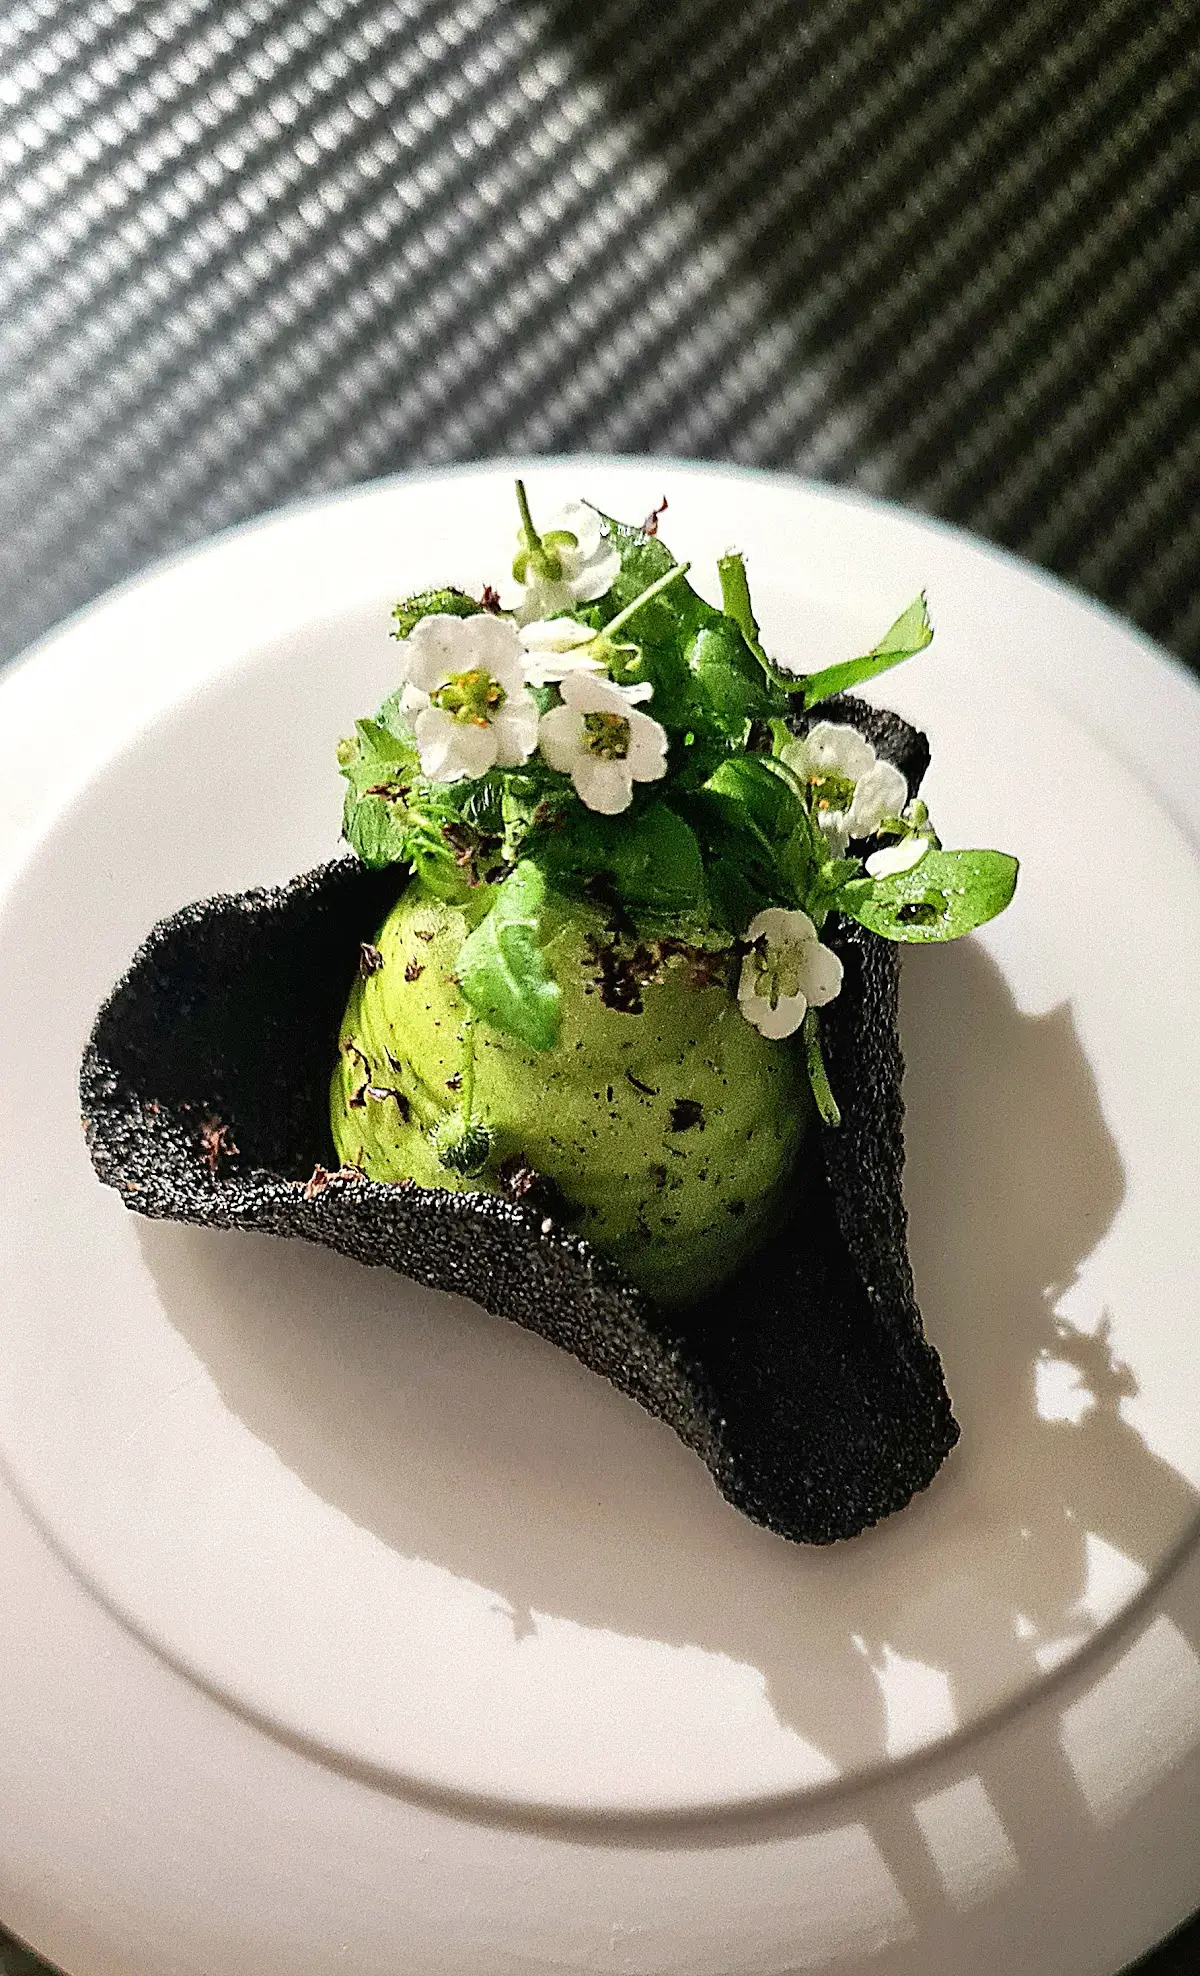 A beautifully presented dish at Restaurant Frederic Simonin in Paris, featuring a green scoop garnished with white flowers and crispy black elements.